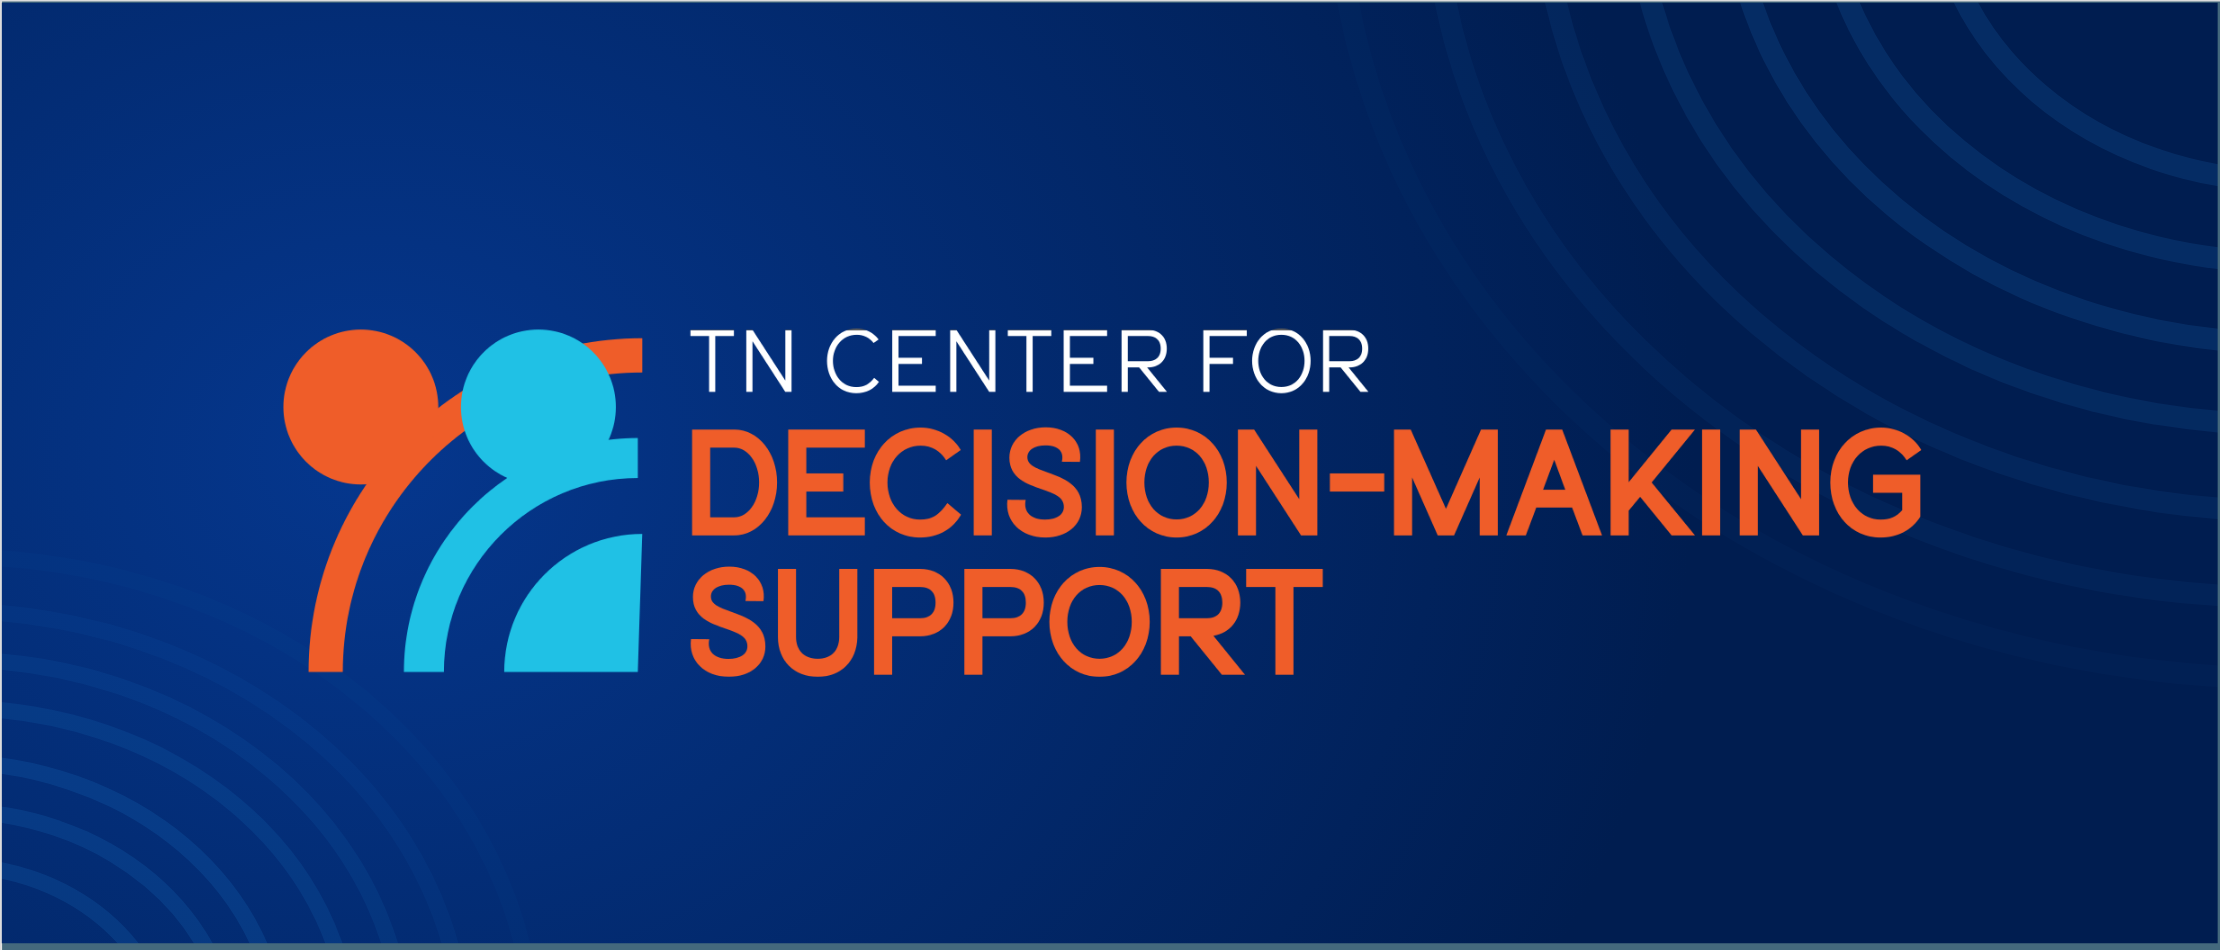 The Center for Decision-Making Support